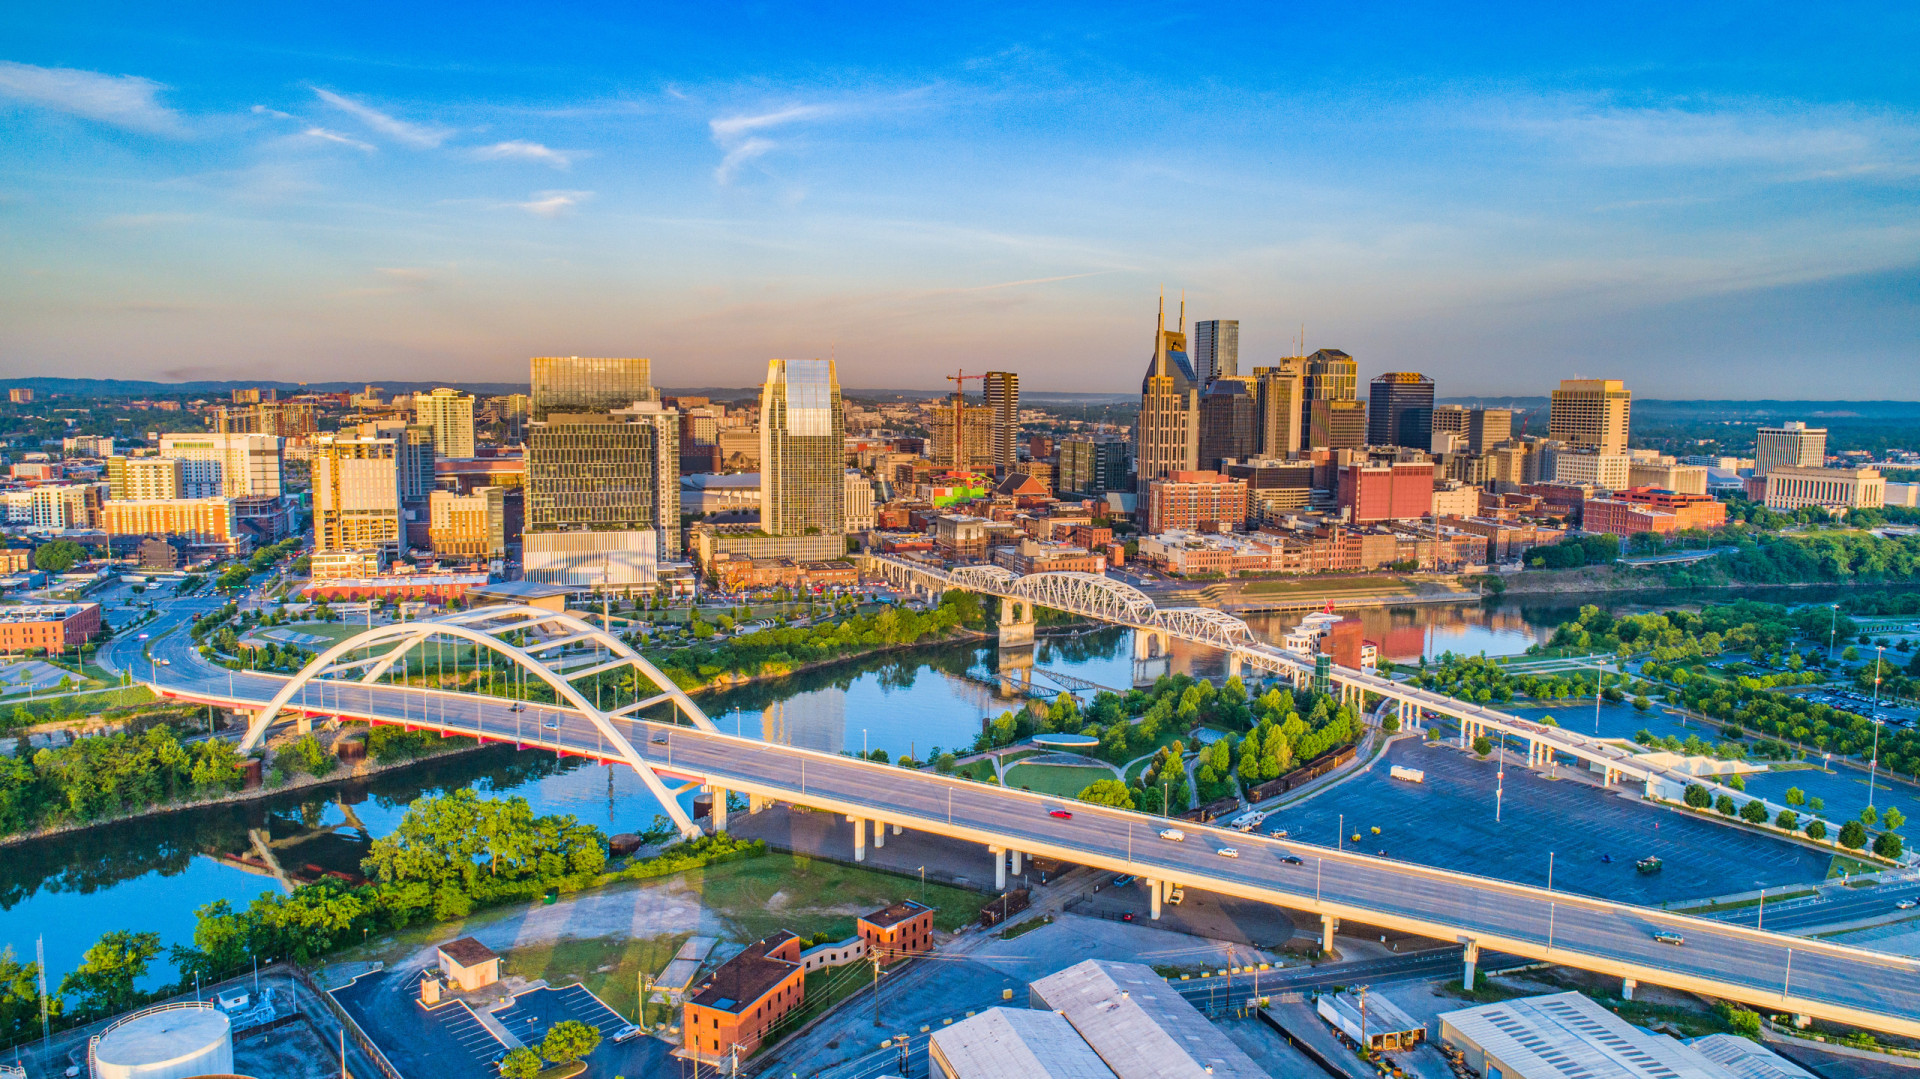 <p>Nashville, scoring 55.7 on the rent index, is the heart of country music and a burgeoning business hub. Its blend of cultural richness and economic growth makes it an appealing, yet expensive, place to live.</p><p>You may also like:<a href="https://www.starsinsider.com/n/104522?utm_source=msn.com&utm_medium=display&utm_campaign=referral_description&utm_content=651794en-in"> 30 ways to boost your immune system</a></p>